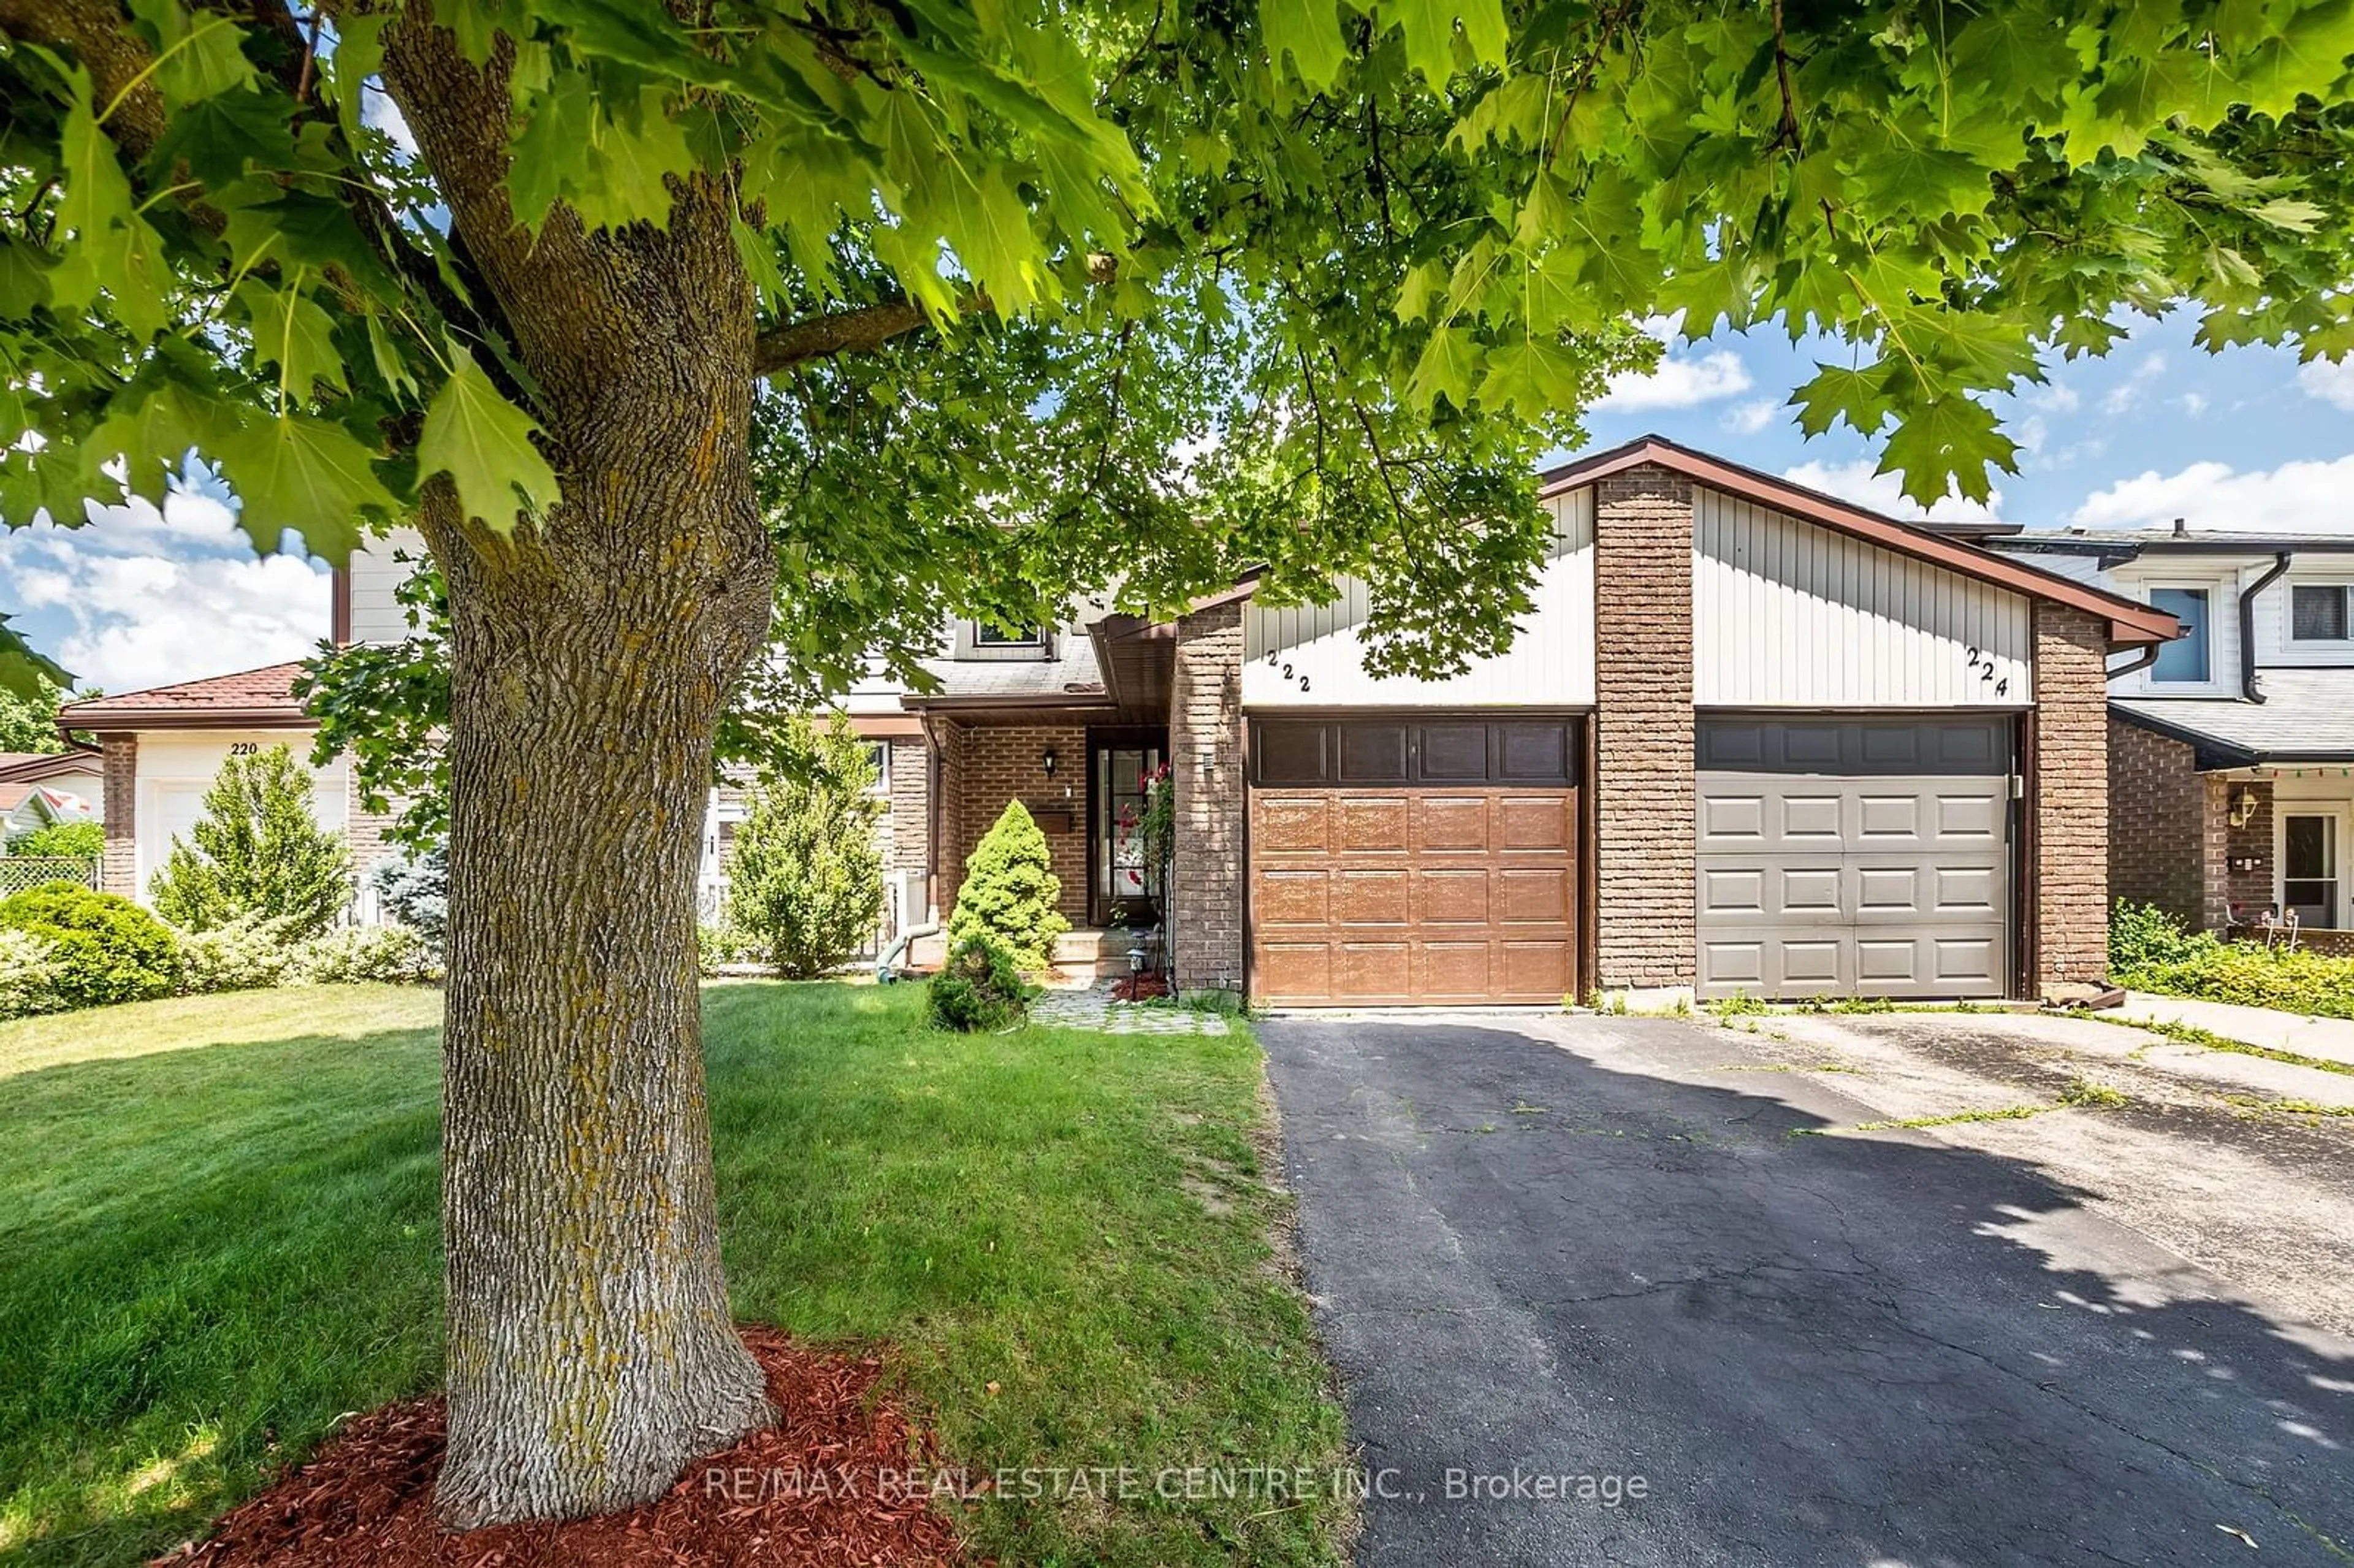 Home with brick exterior material for 222 Sunset Blvd, Cambridge Ontario N1S 4M5